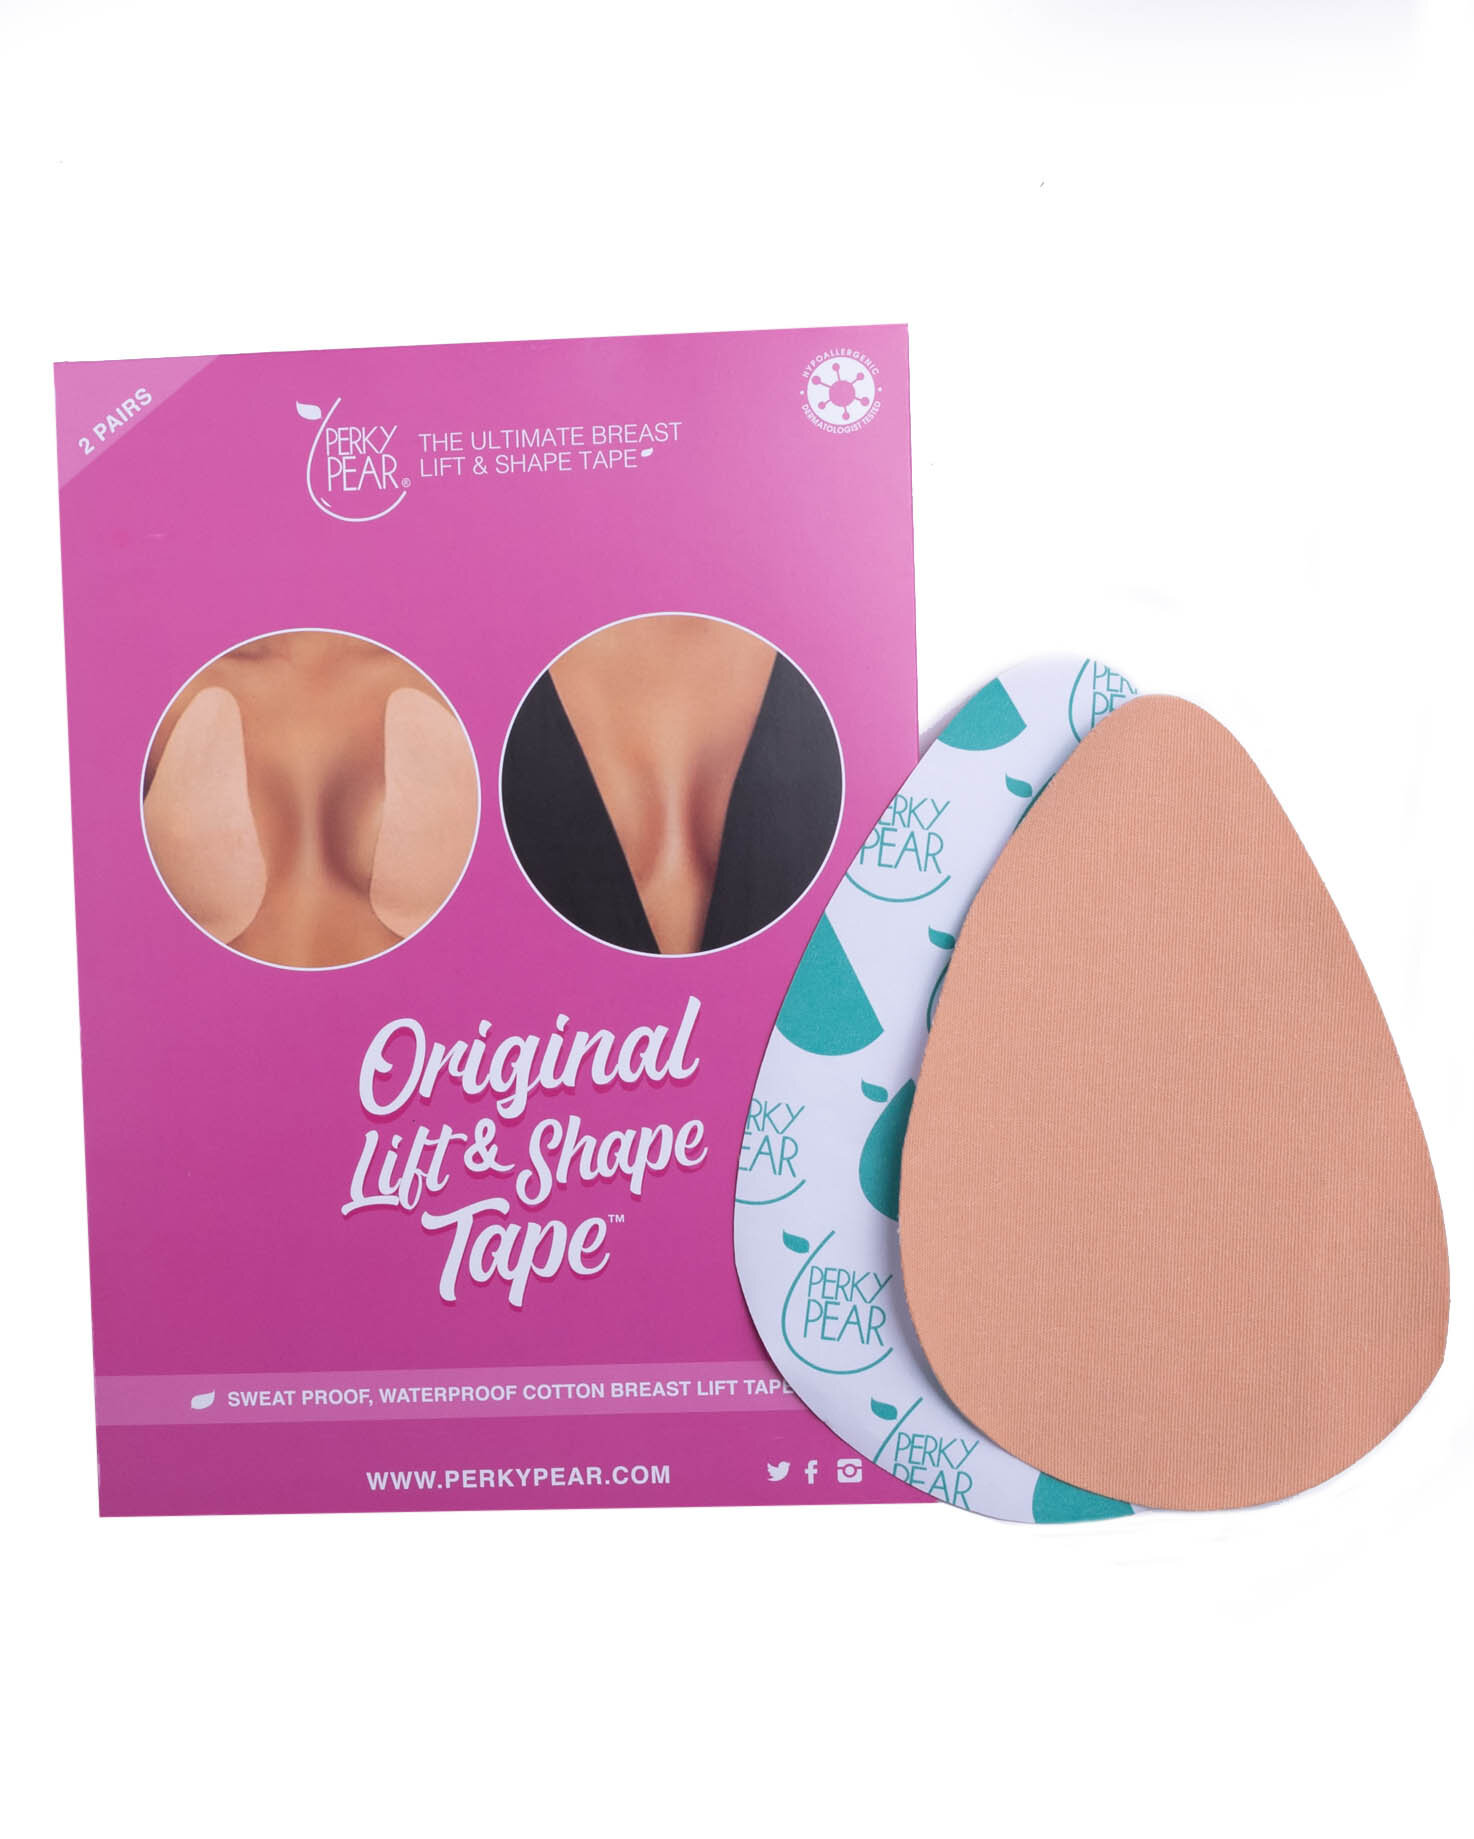 Original Lift and Shape Tape™ By Perky Pear® — The Fall Bride